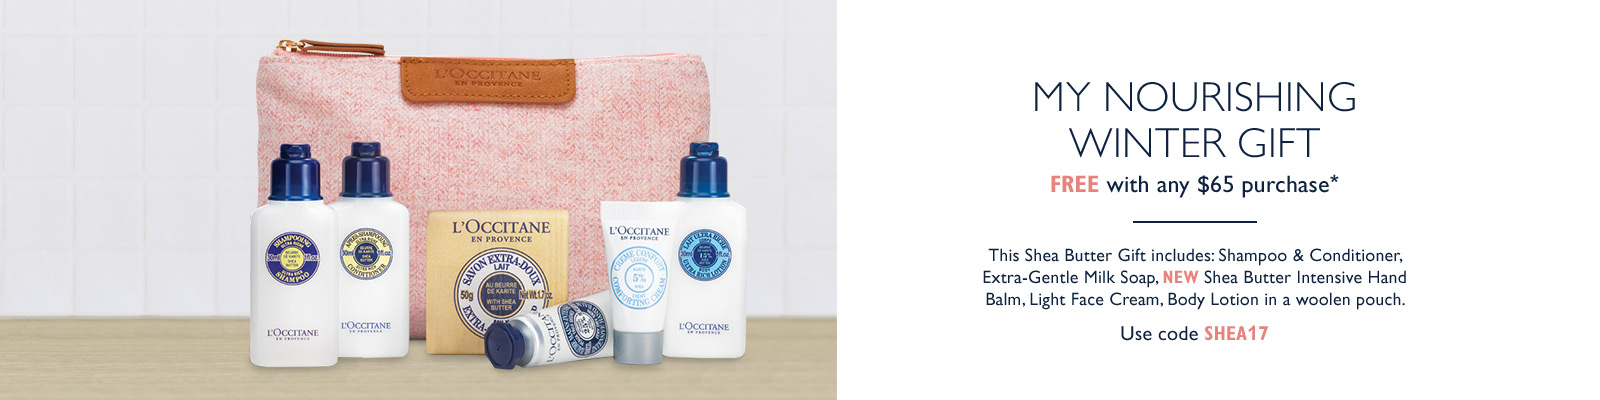 Receive a free 7-piece bonus gift with your $65 L'Occitane purchase